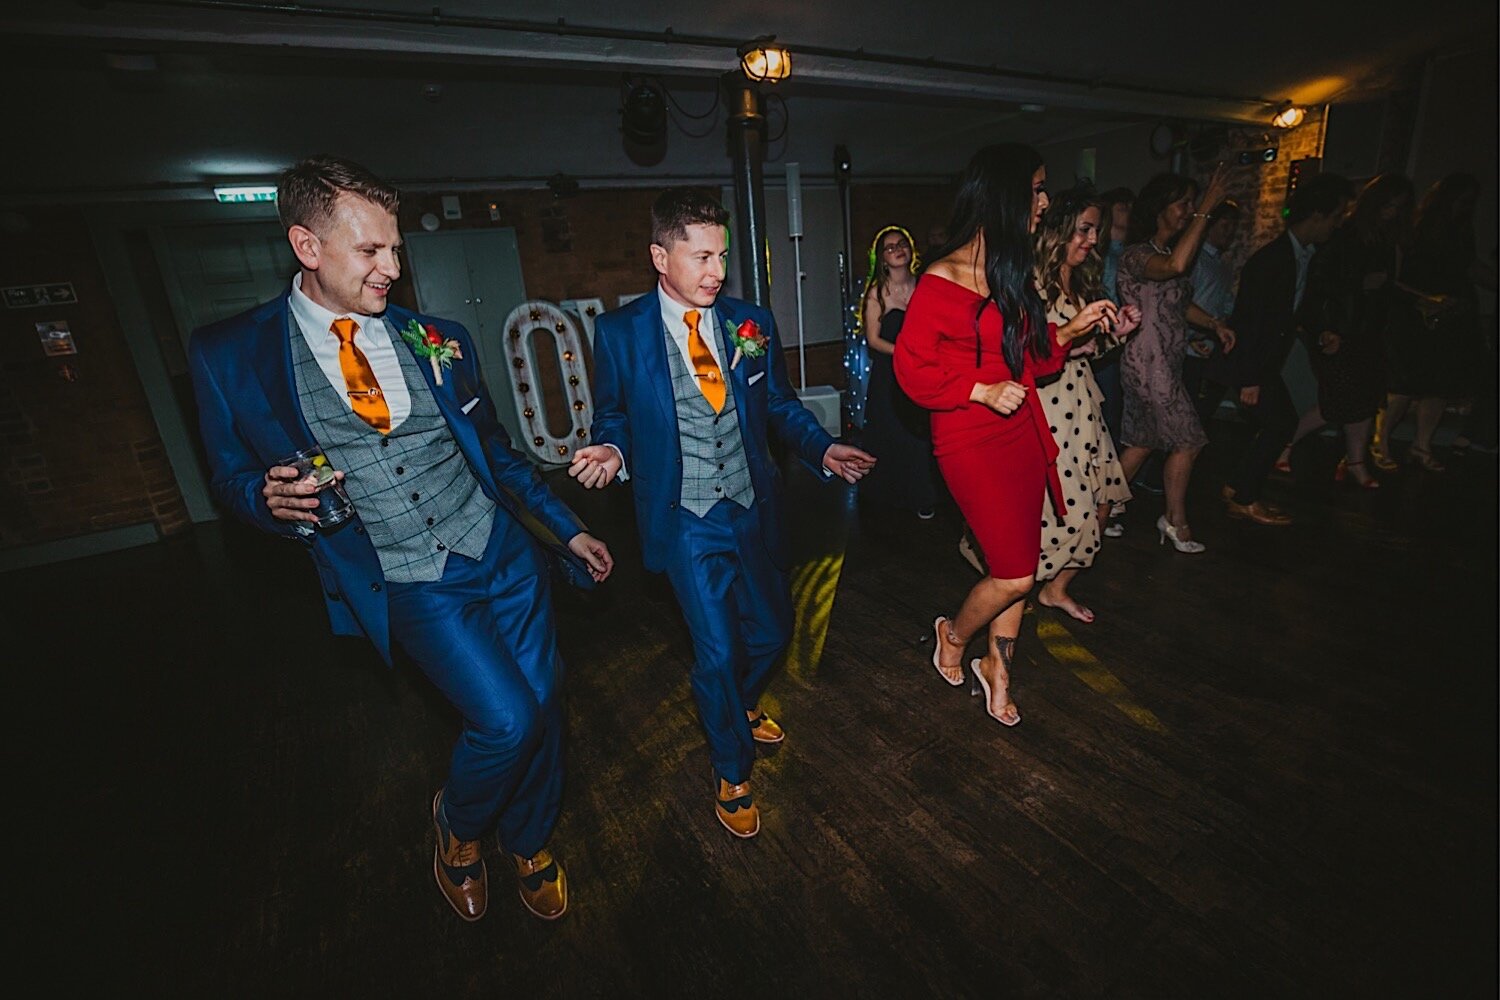 86_TWS-1039_photographer_wedding_industrial_venue_gay_grooms_photography_party_chic_westmill_derby.jpg